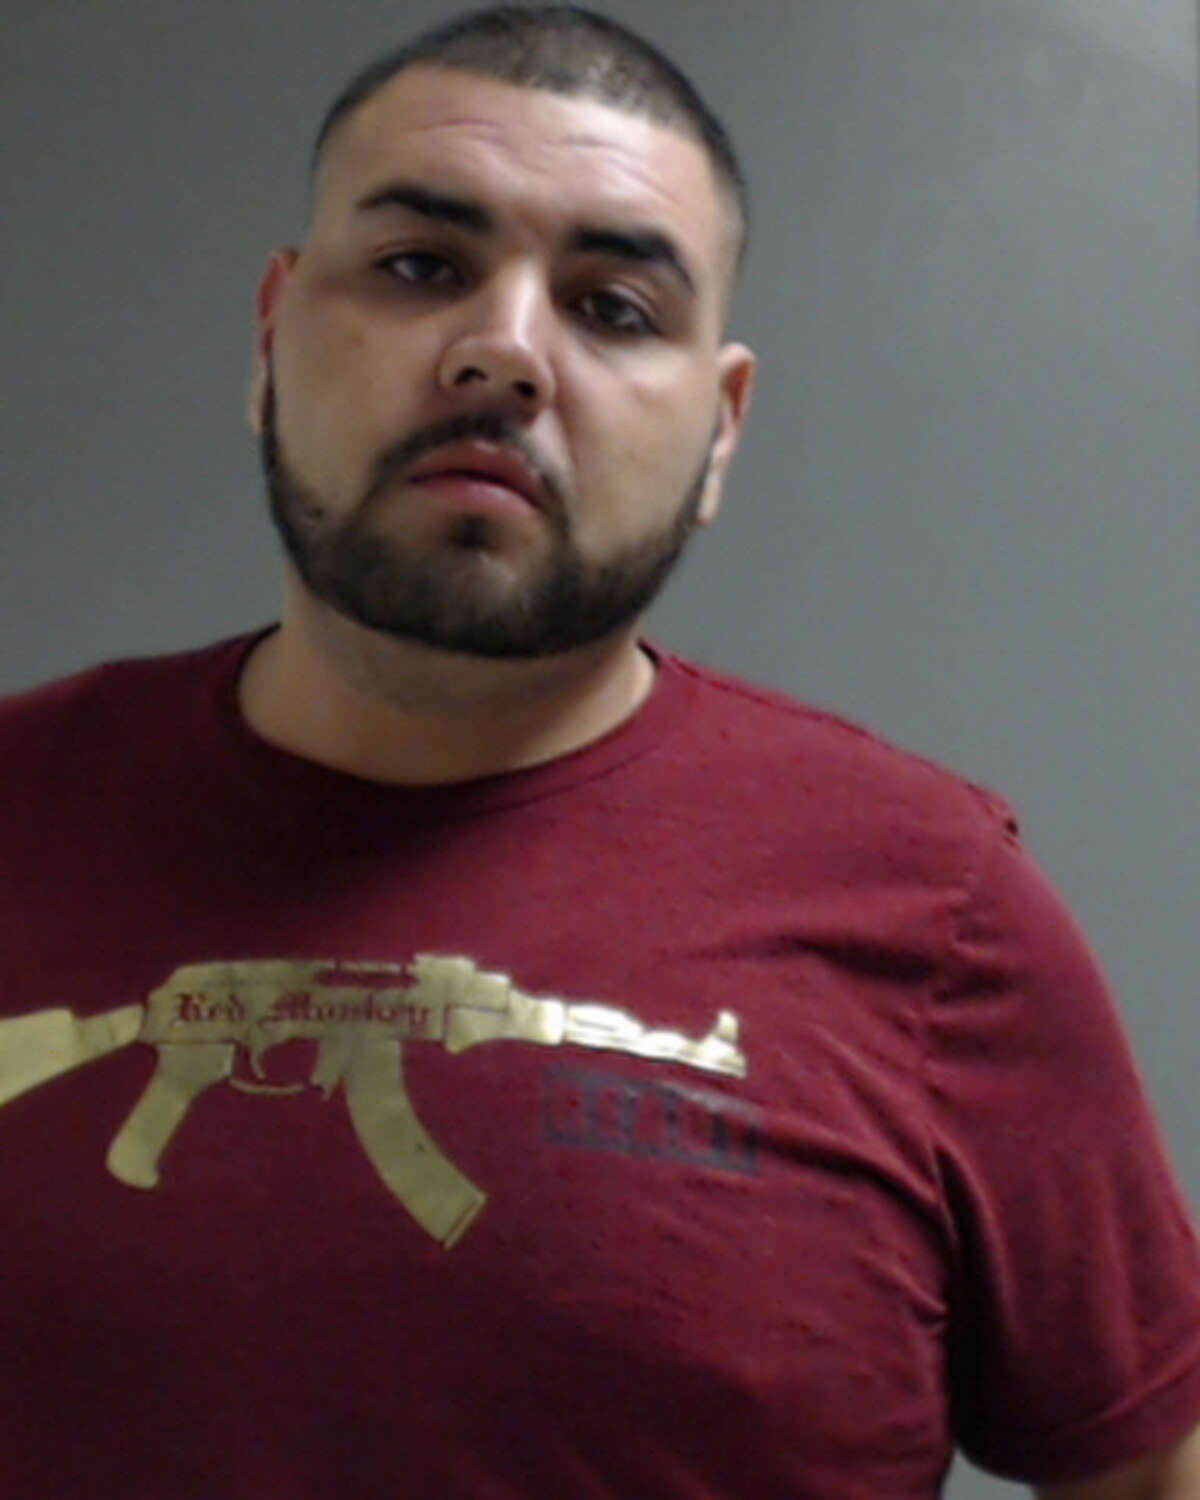 Gerardo Guerrero Charges: Engaging in organized criminal activity, gambling promotion, keeping a gambling place, possession of gambling device, equipment or paraphernalia Charge date: July 12, 2016